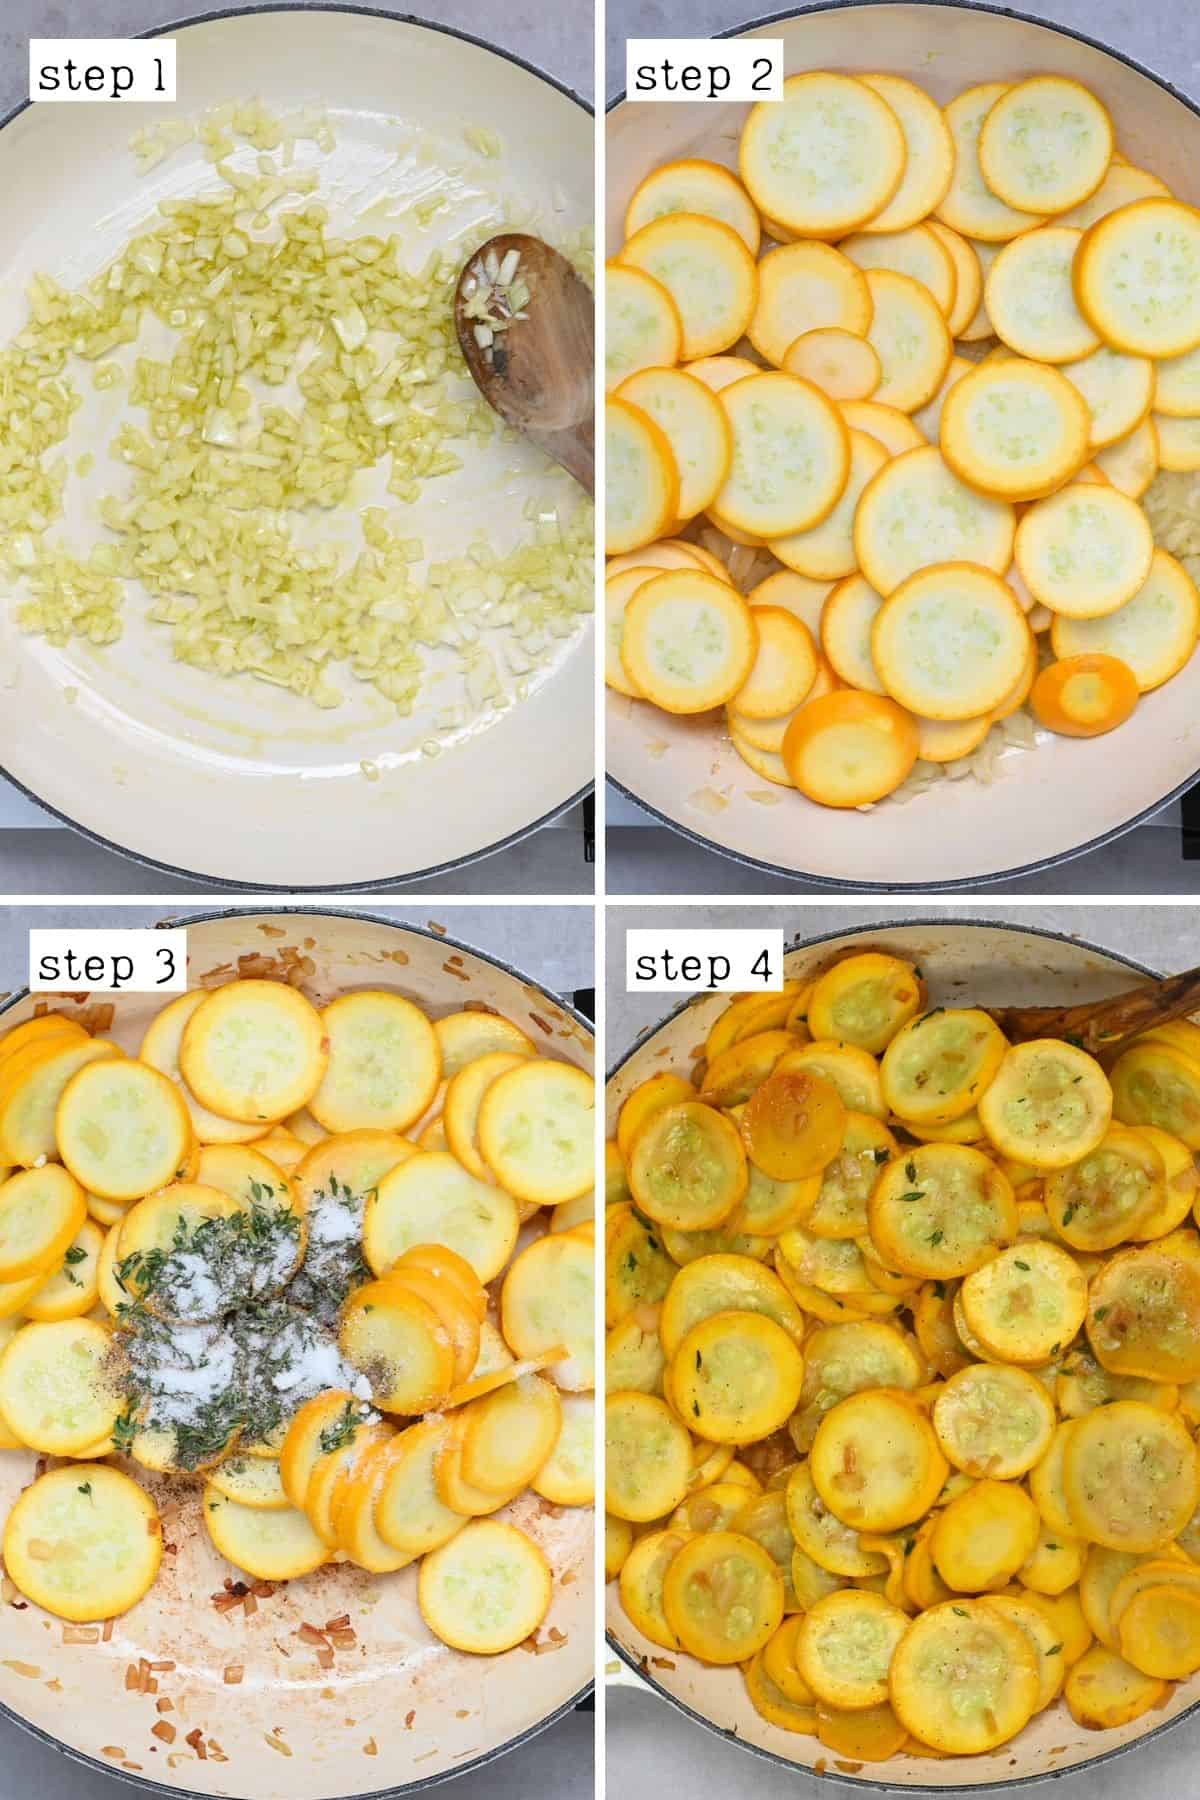 Steps for precooking squash in a pan